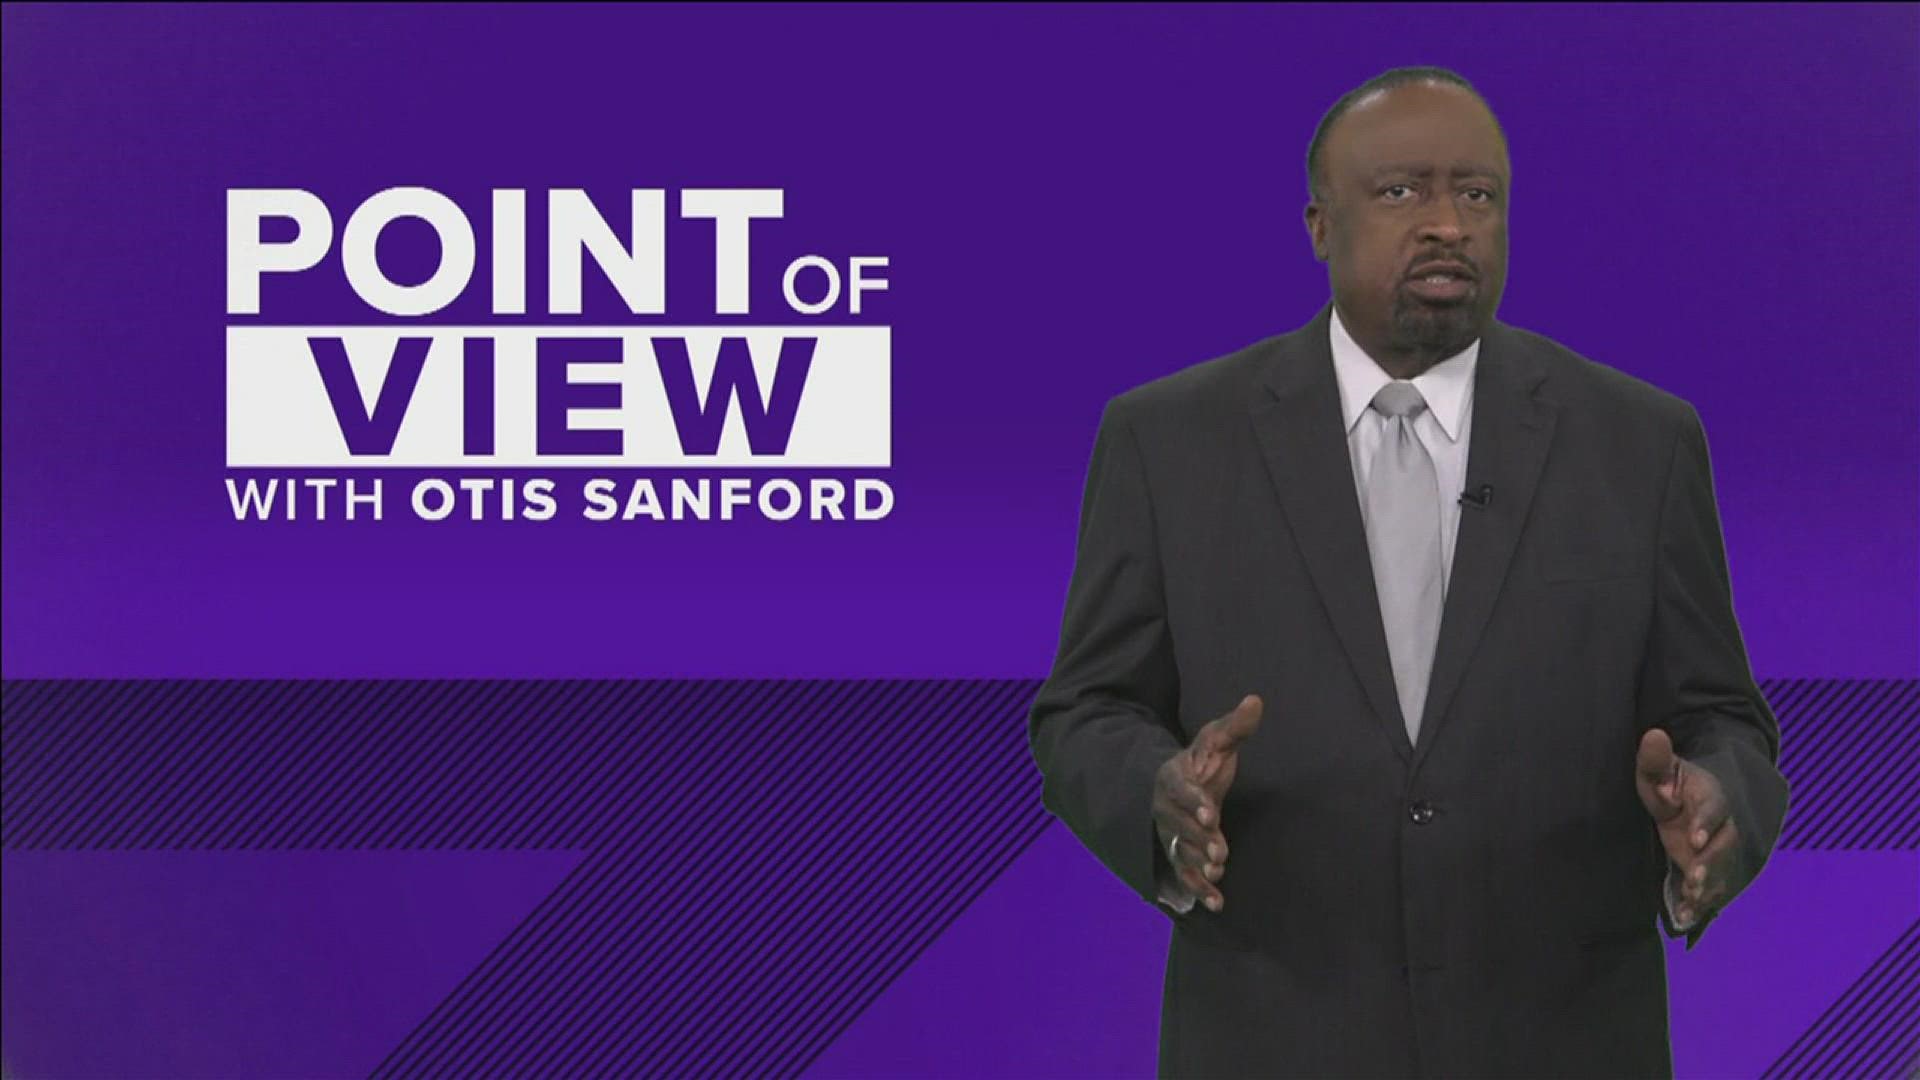 ABC24 political analyst and commentator Otis Sanford shared his point of view on voting rights and gerrymandering.